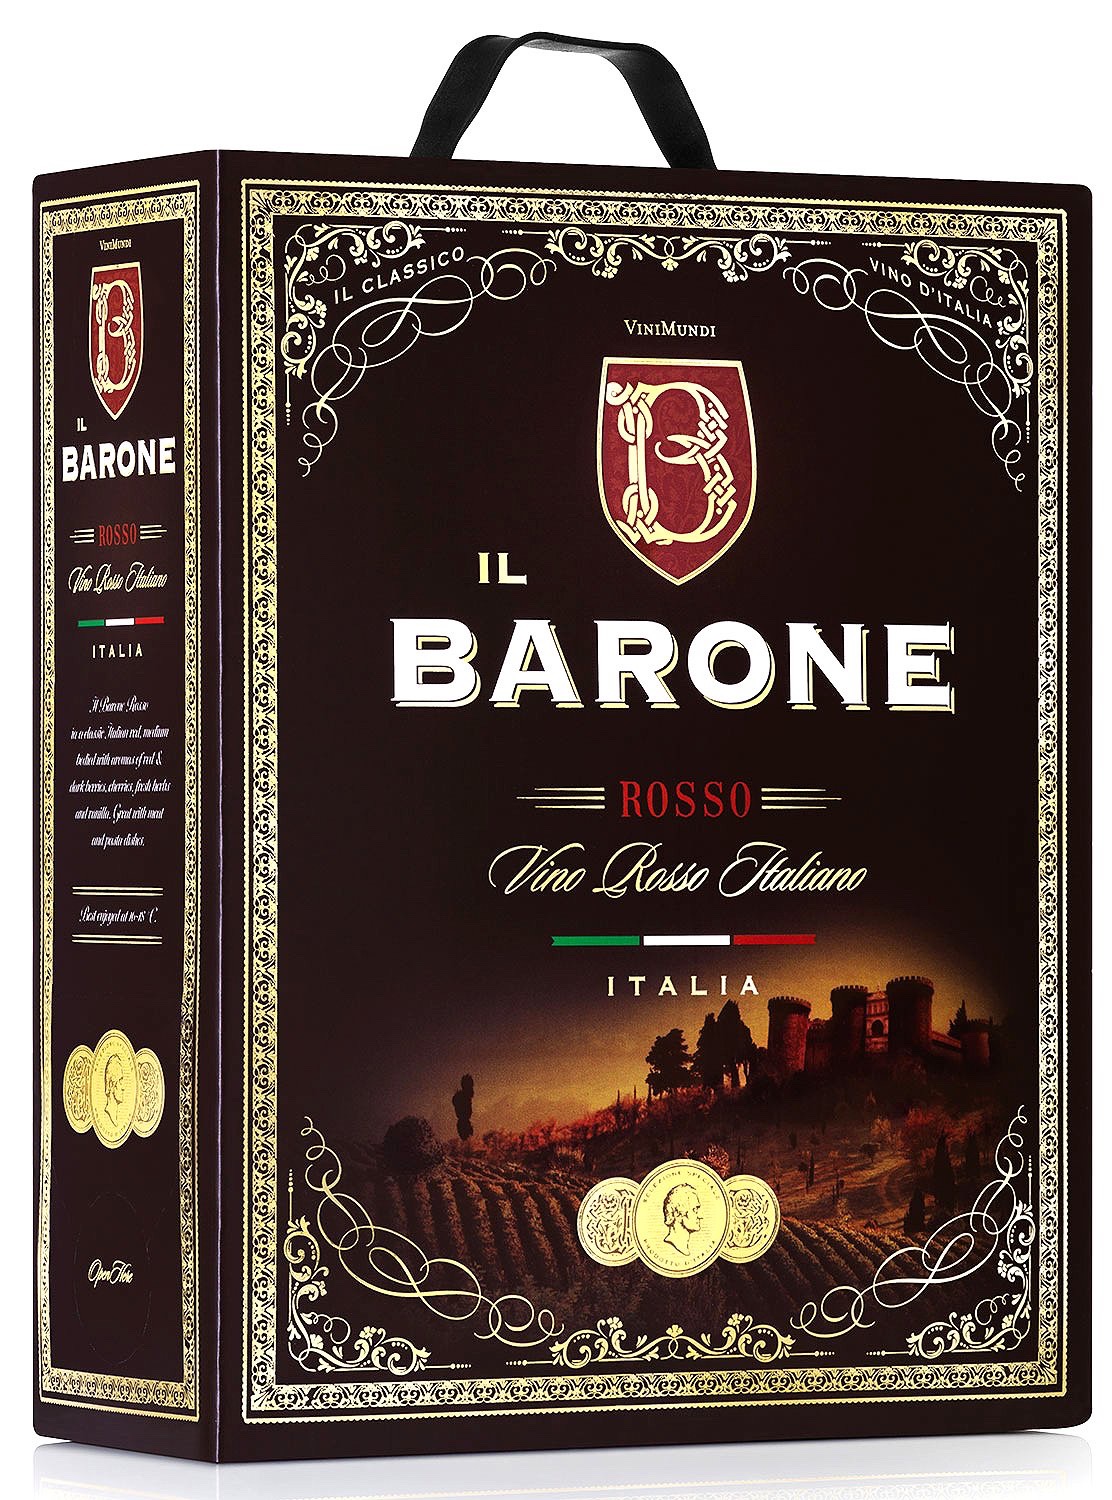 Vang bịch ngọt Barone Rosso 3L